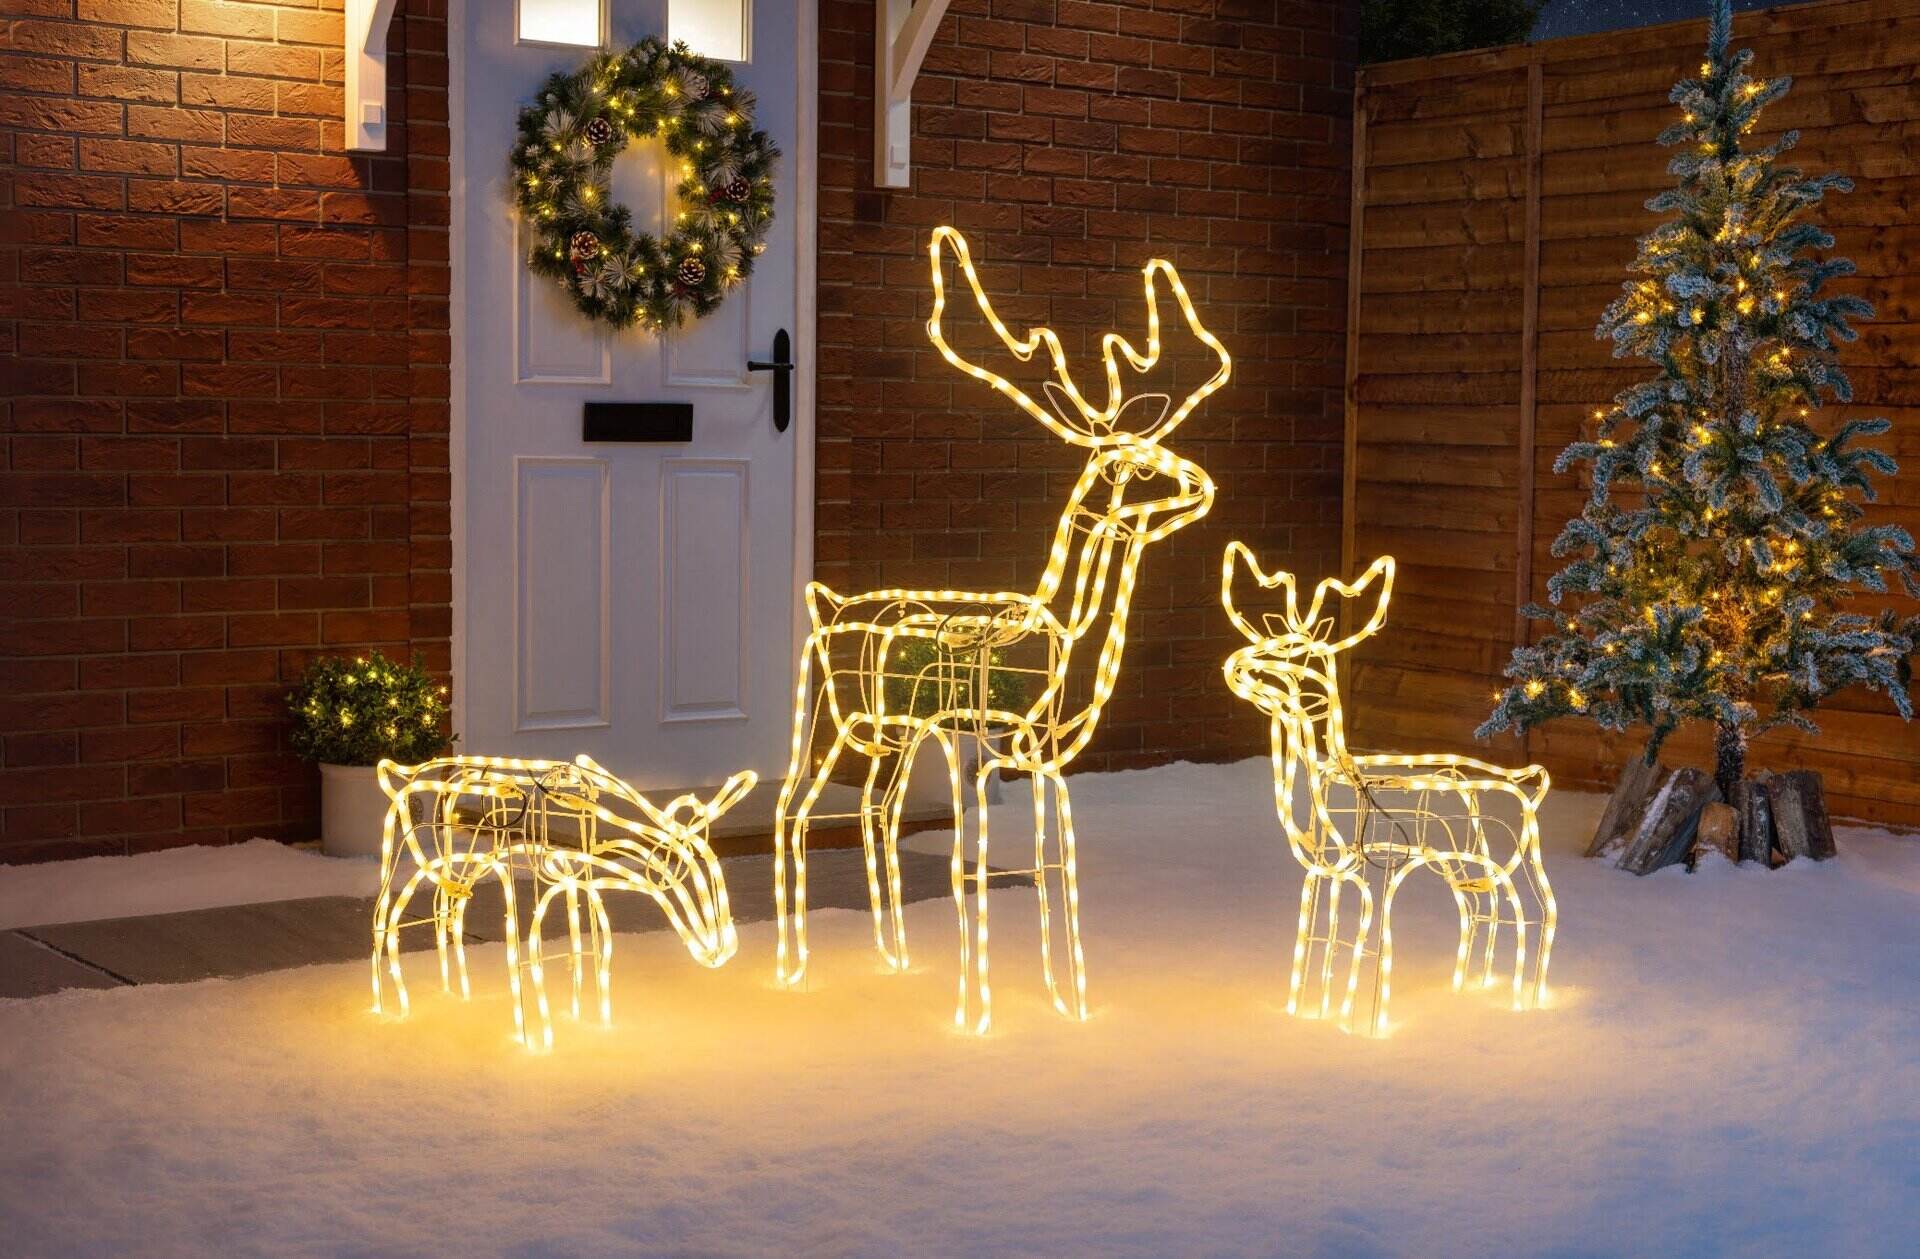 How To Choose Outdoor Christmas Decorations